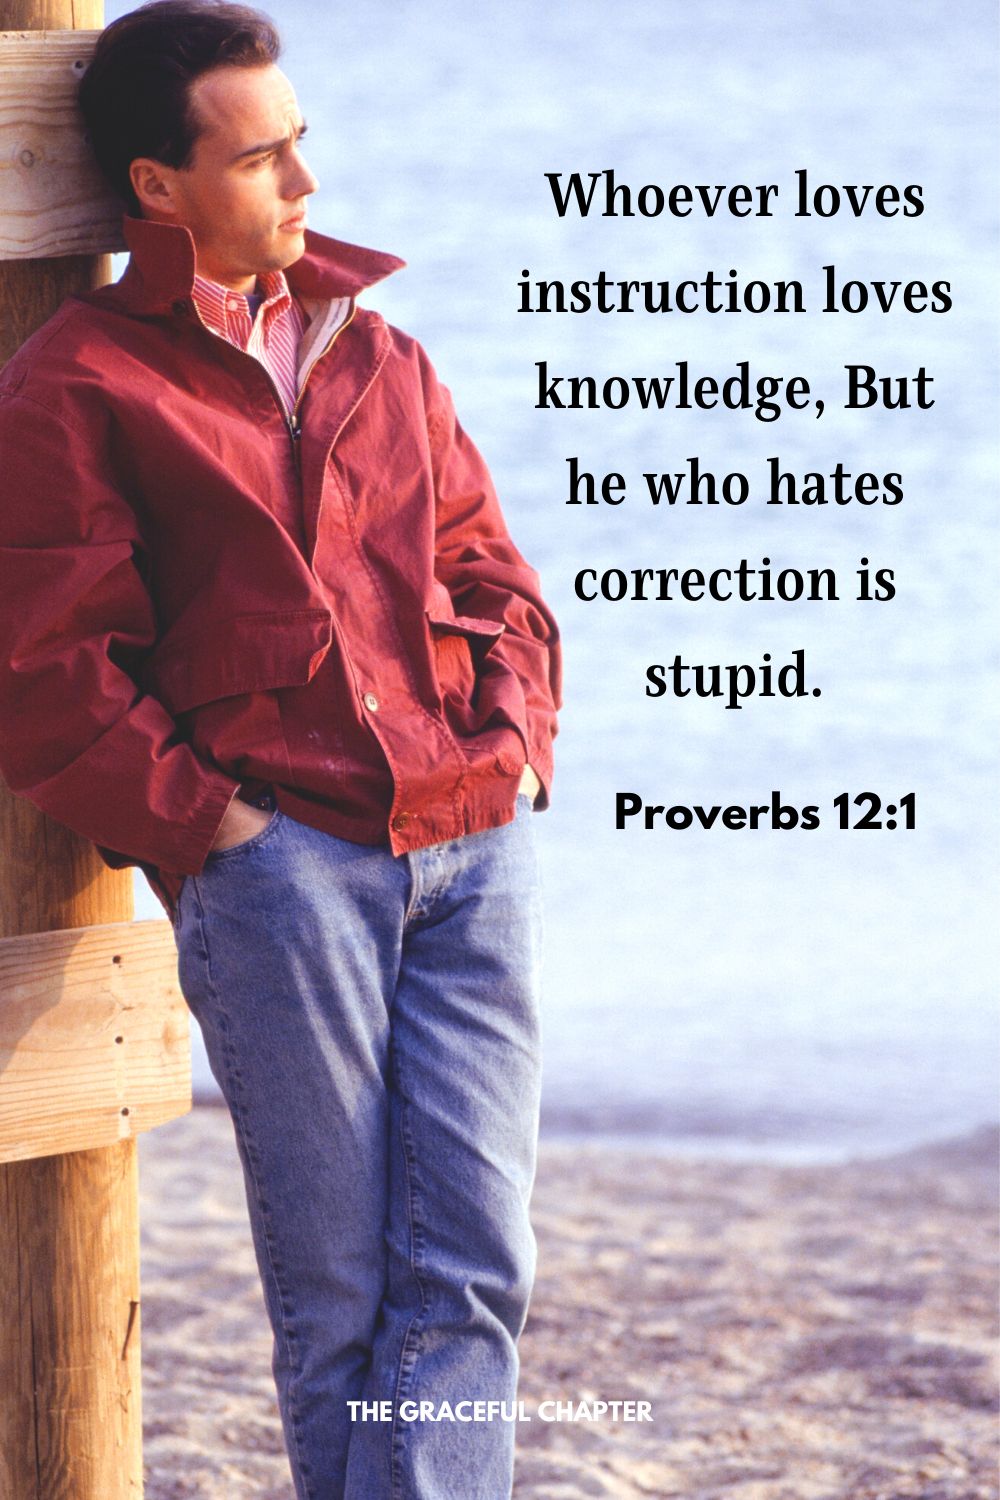 Whoever loves instruction loves knowledge, But he who hates correction is stupid. Proverbs 12:1